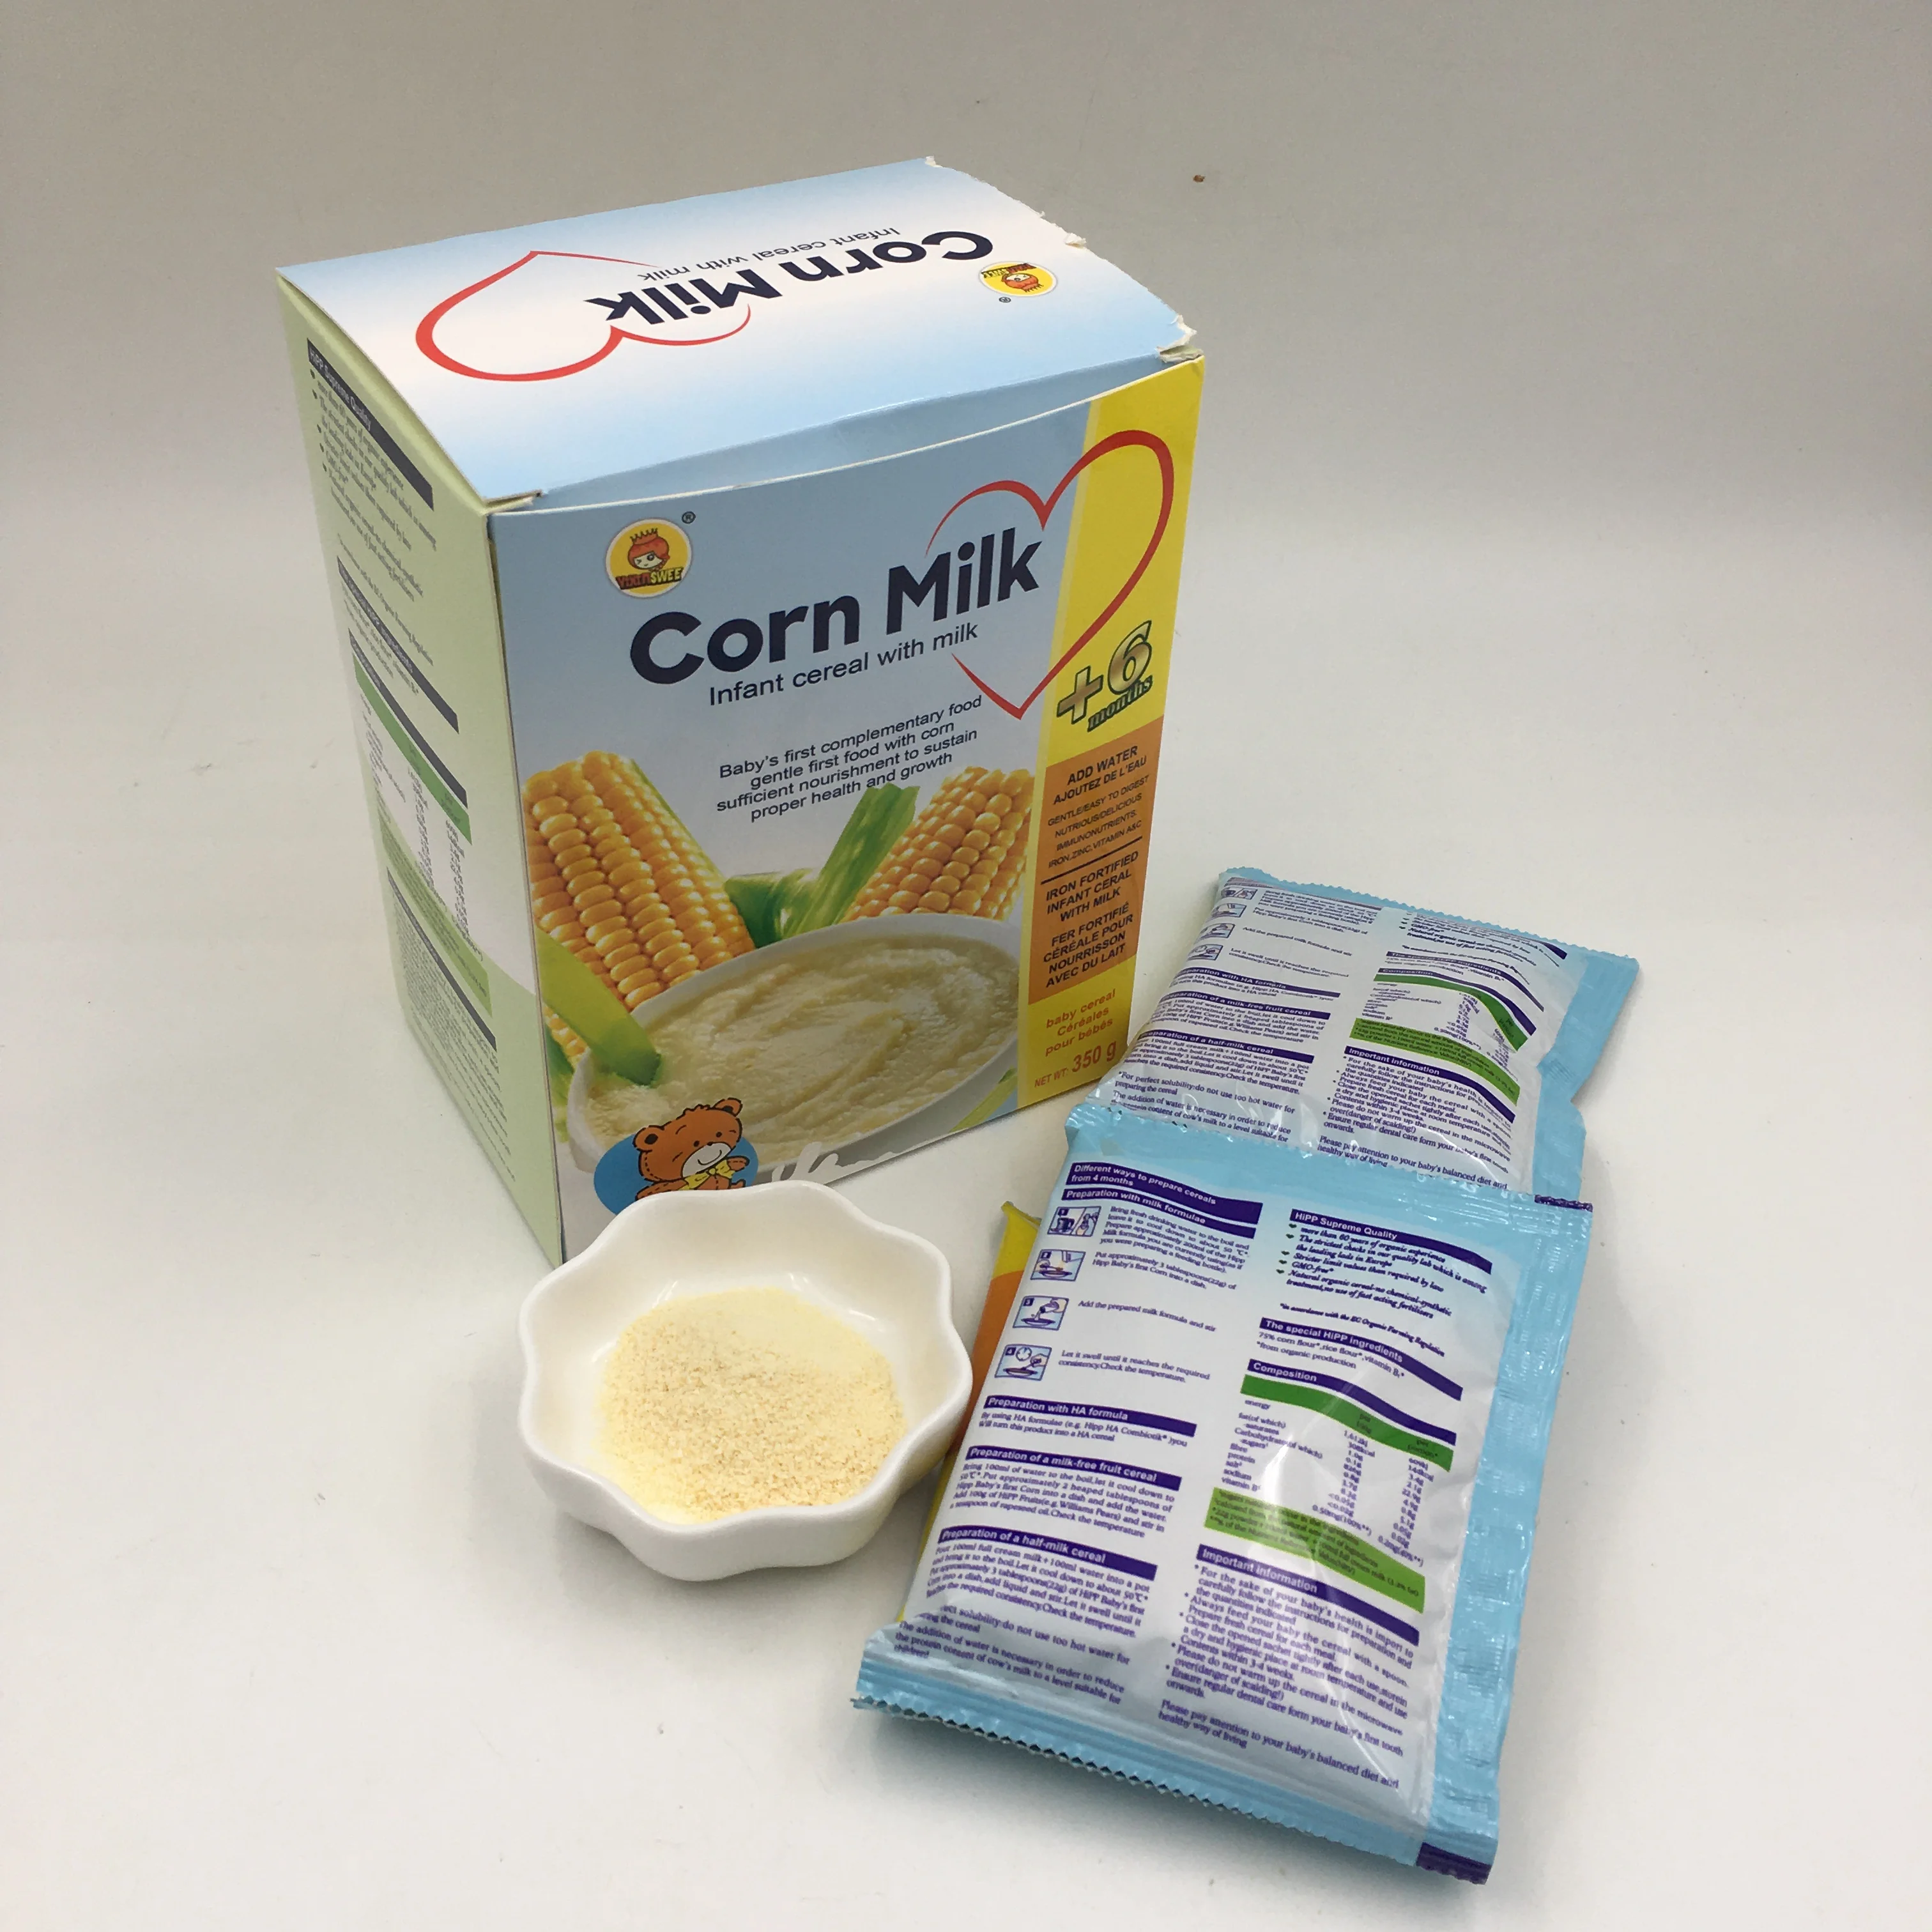 
corn milk powder baby cereal for infant 